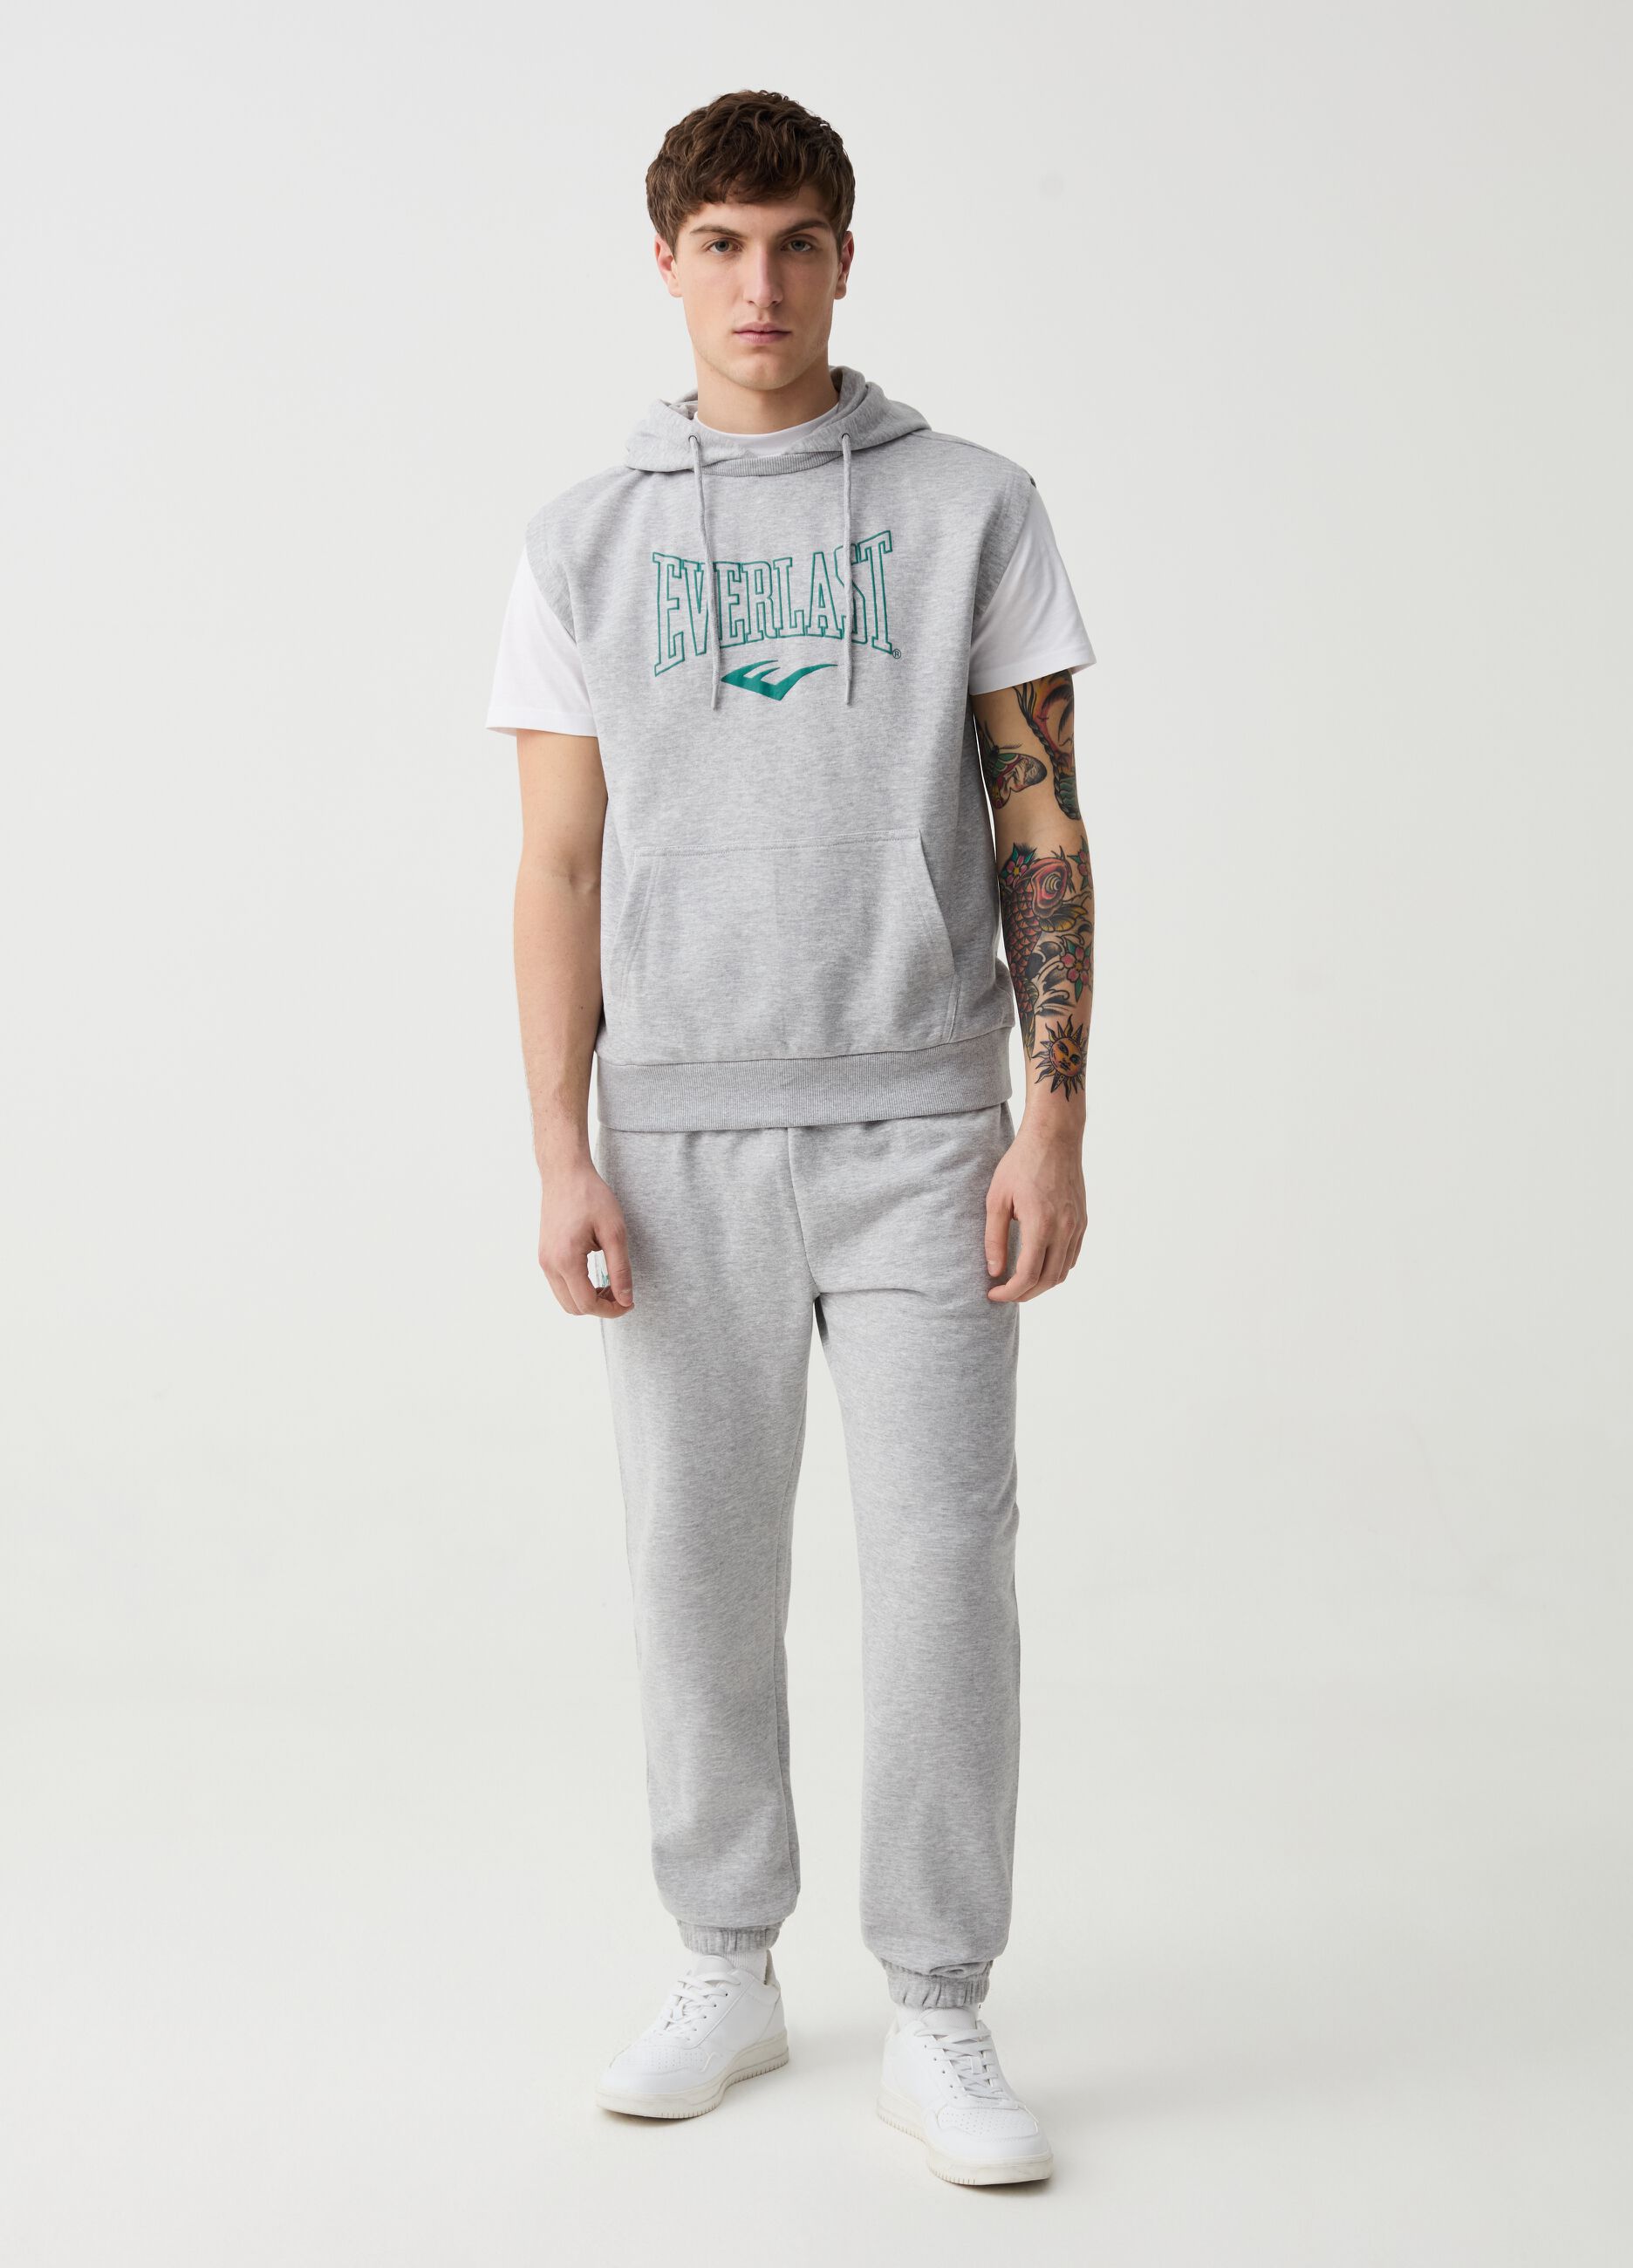 Fleece joggers with drawstring and embroidered logo